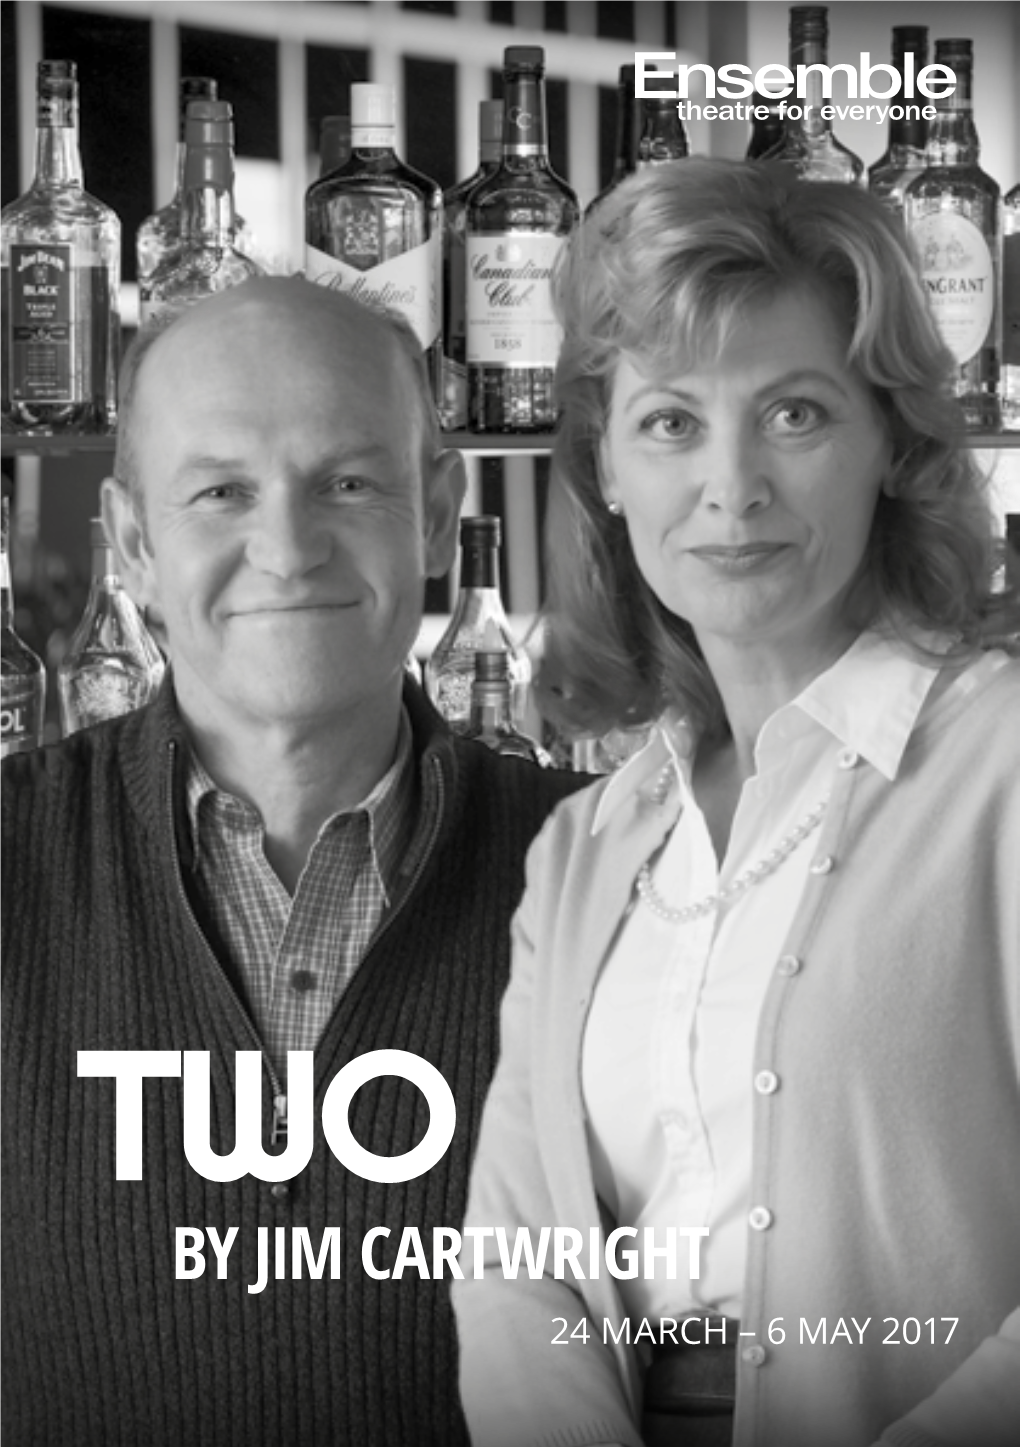 By Jim Cartwright 24 March – 6 May 2017 Two by Jim Cartwright